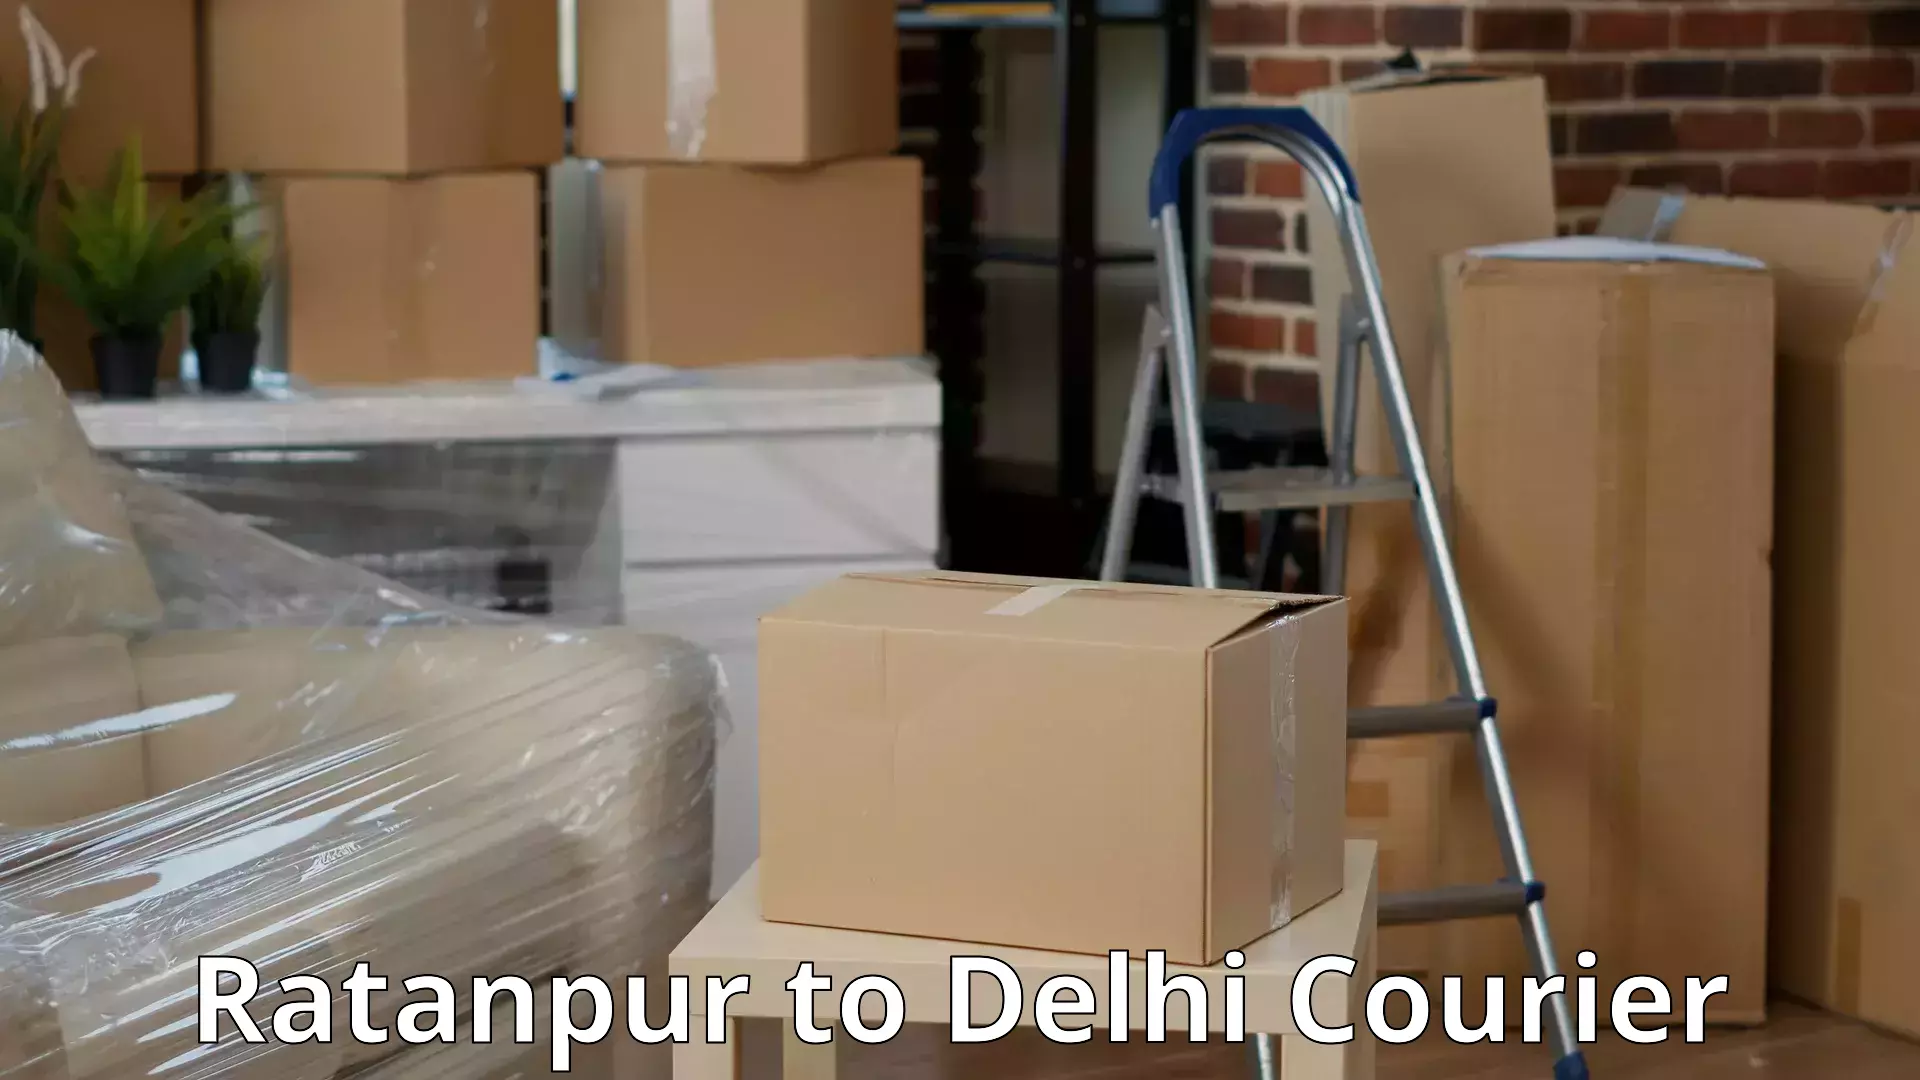 Hassle-free relocation Ratanpur to University of Delhi